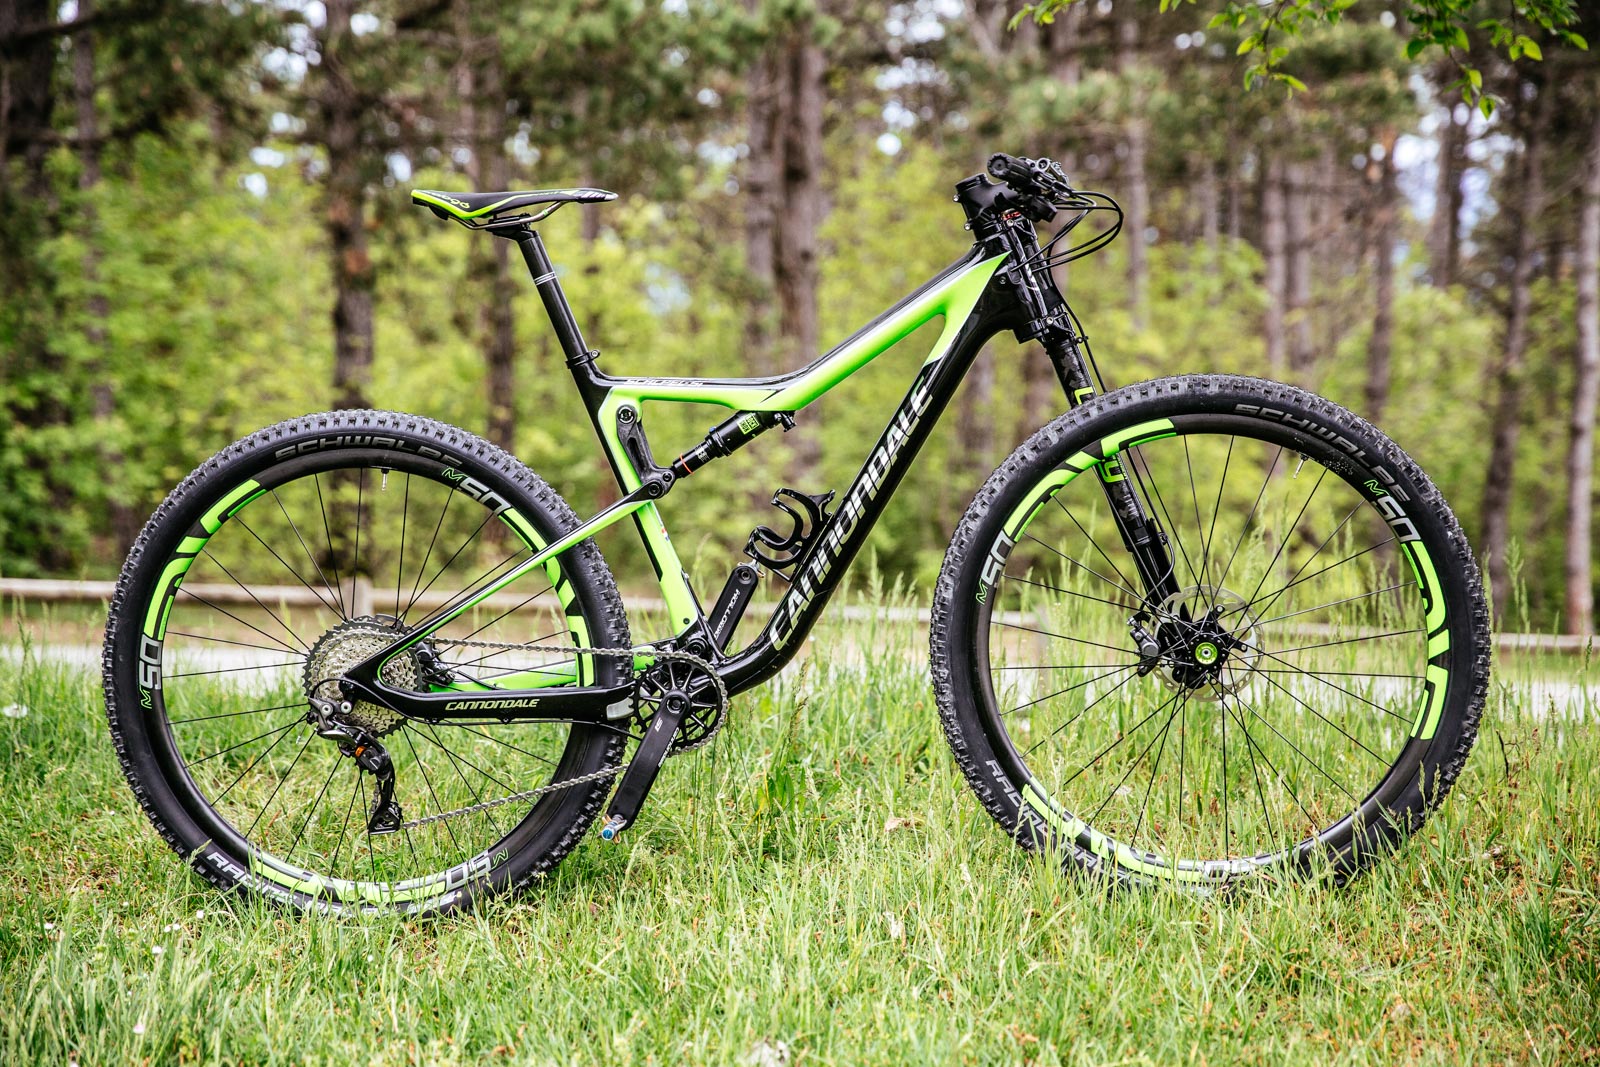 Introducing the 2017 Cannondale Scalpel-Si | MTB-MAG.COM